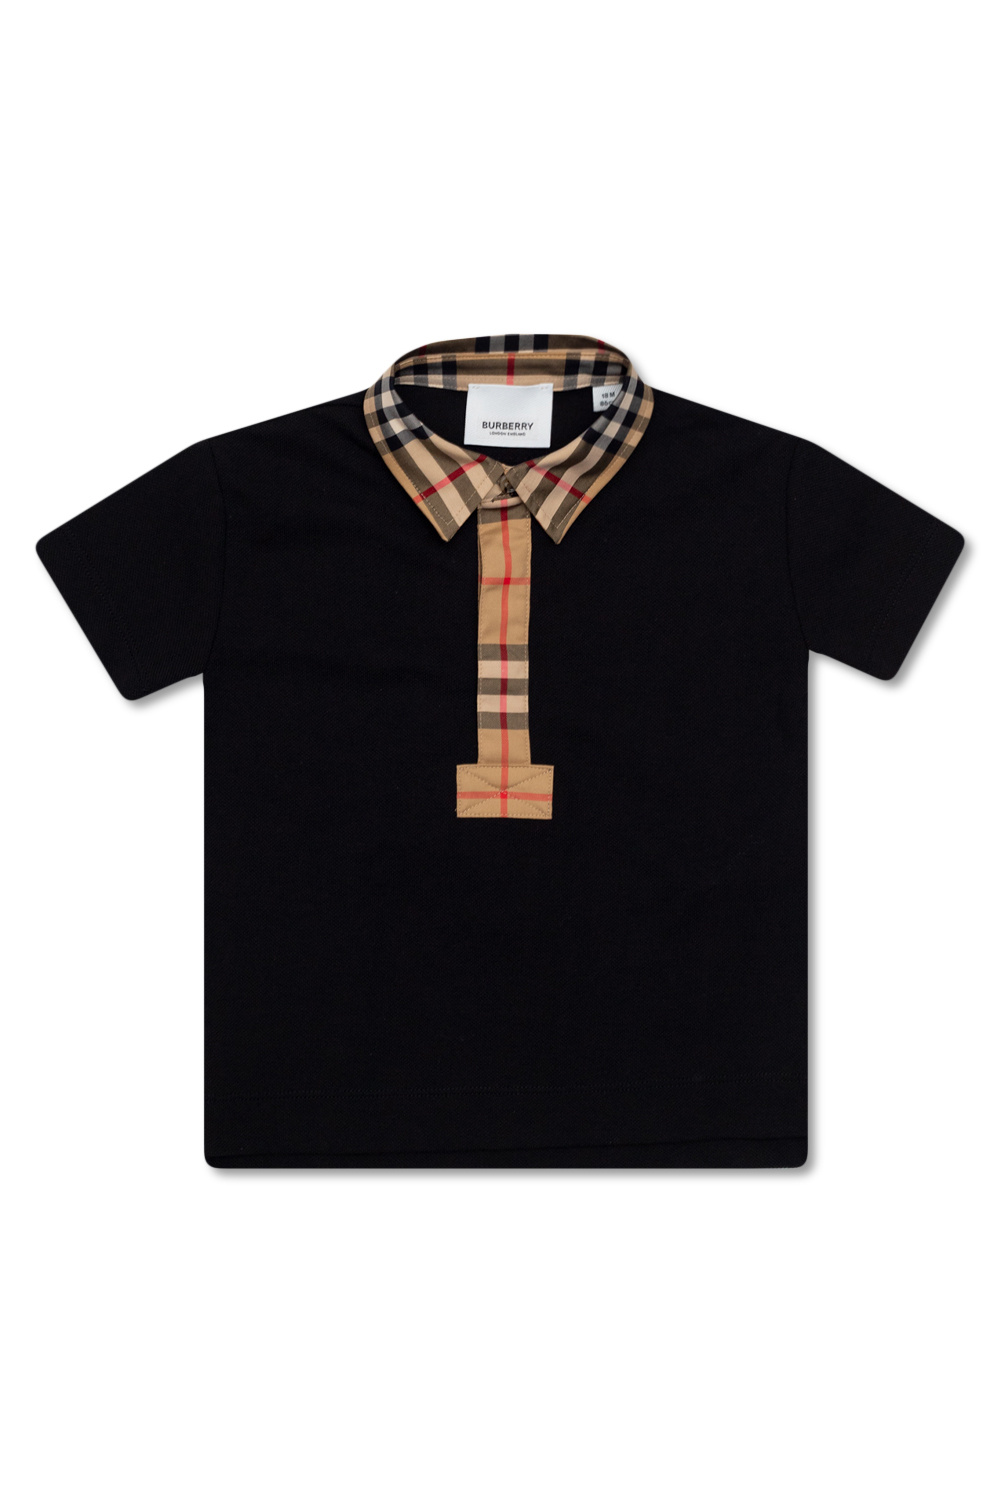 Burberry Kids ‘Johane’ embroidered polo shirt with short sleeves